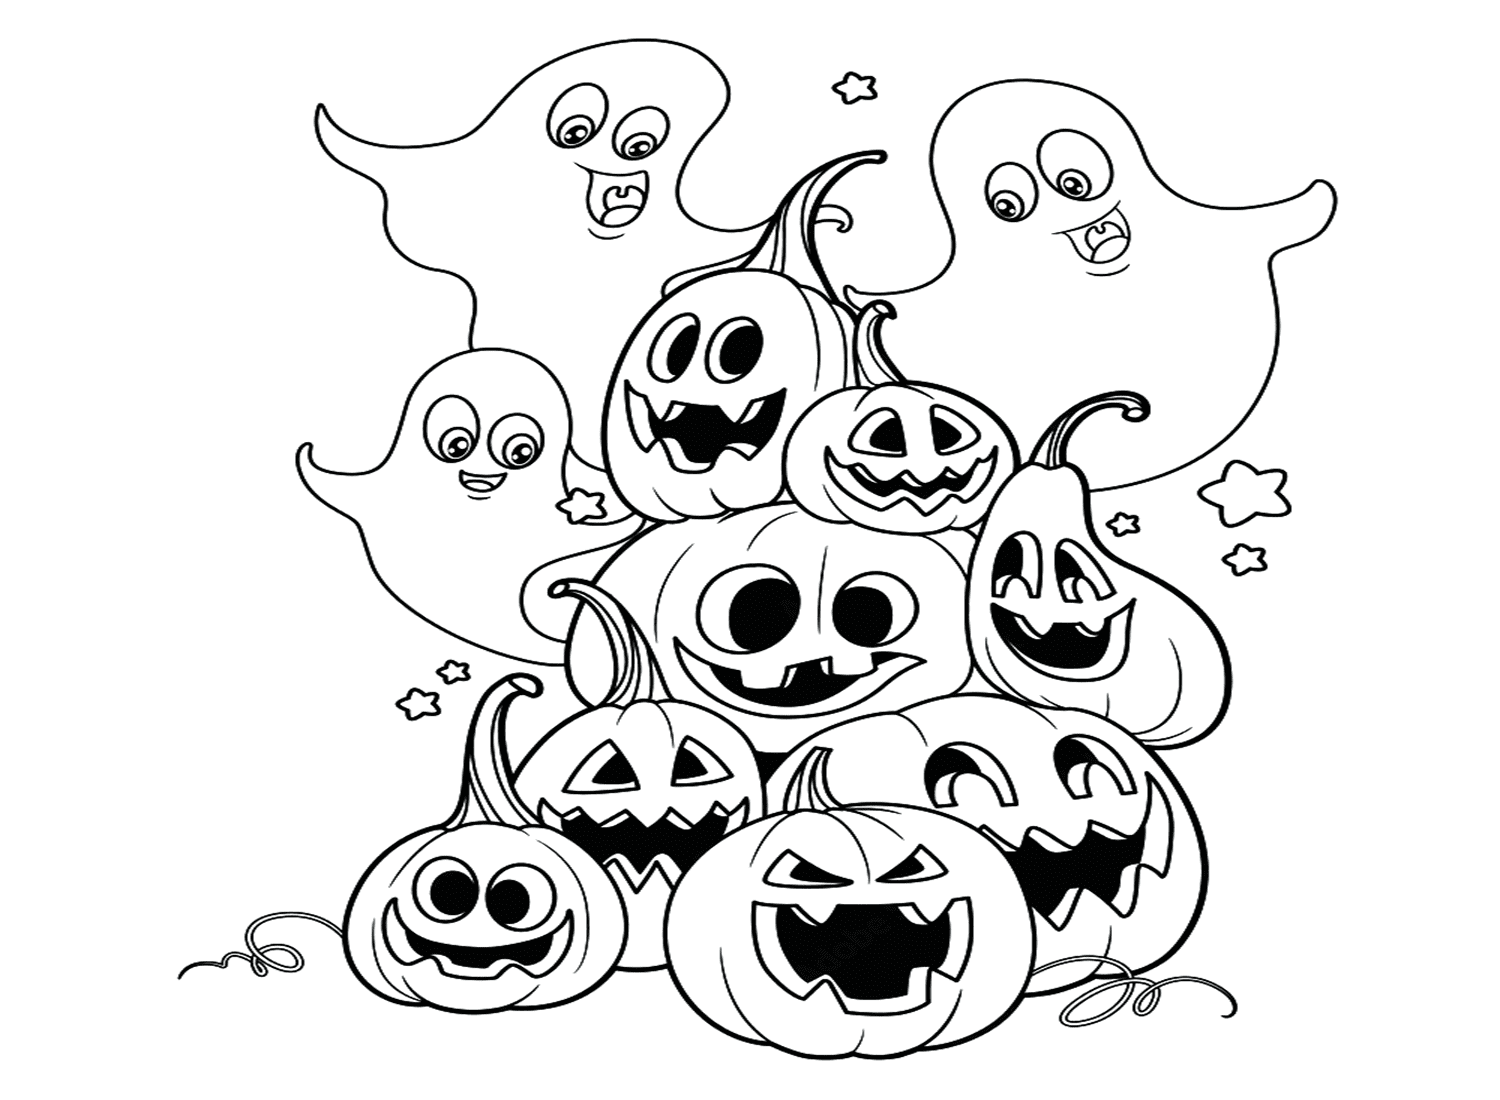 Ghost And Pumpkin Coloring Page - Free Printable Coloring Pages